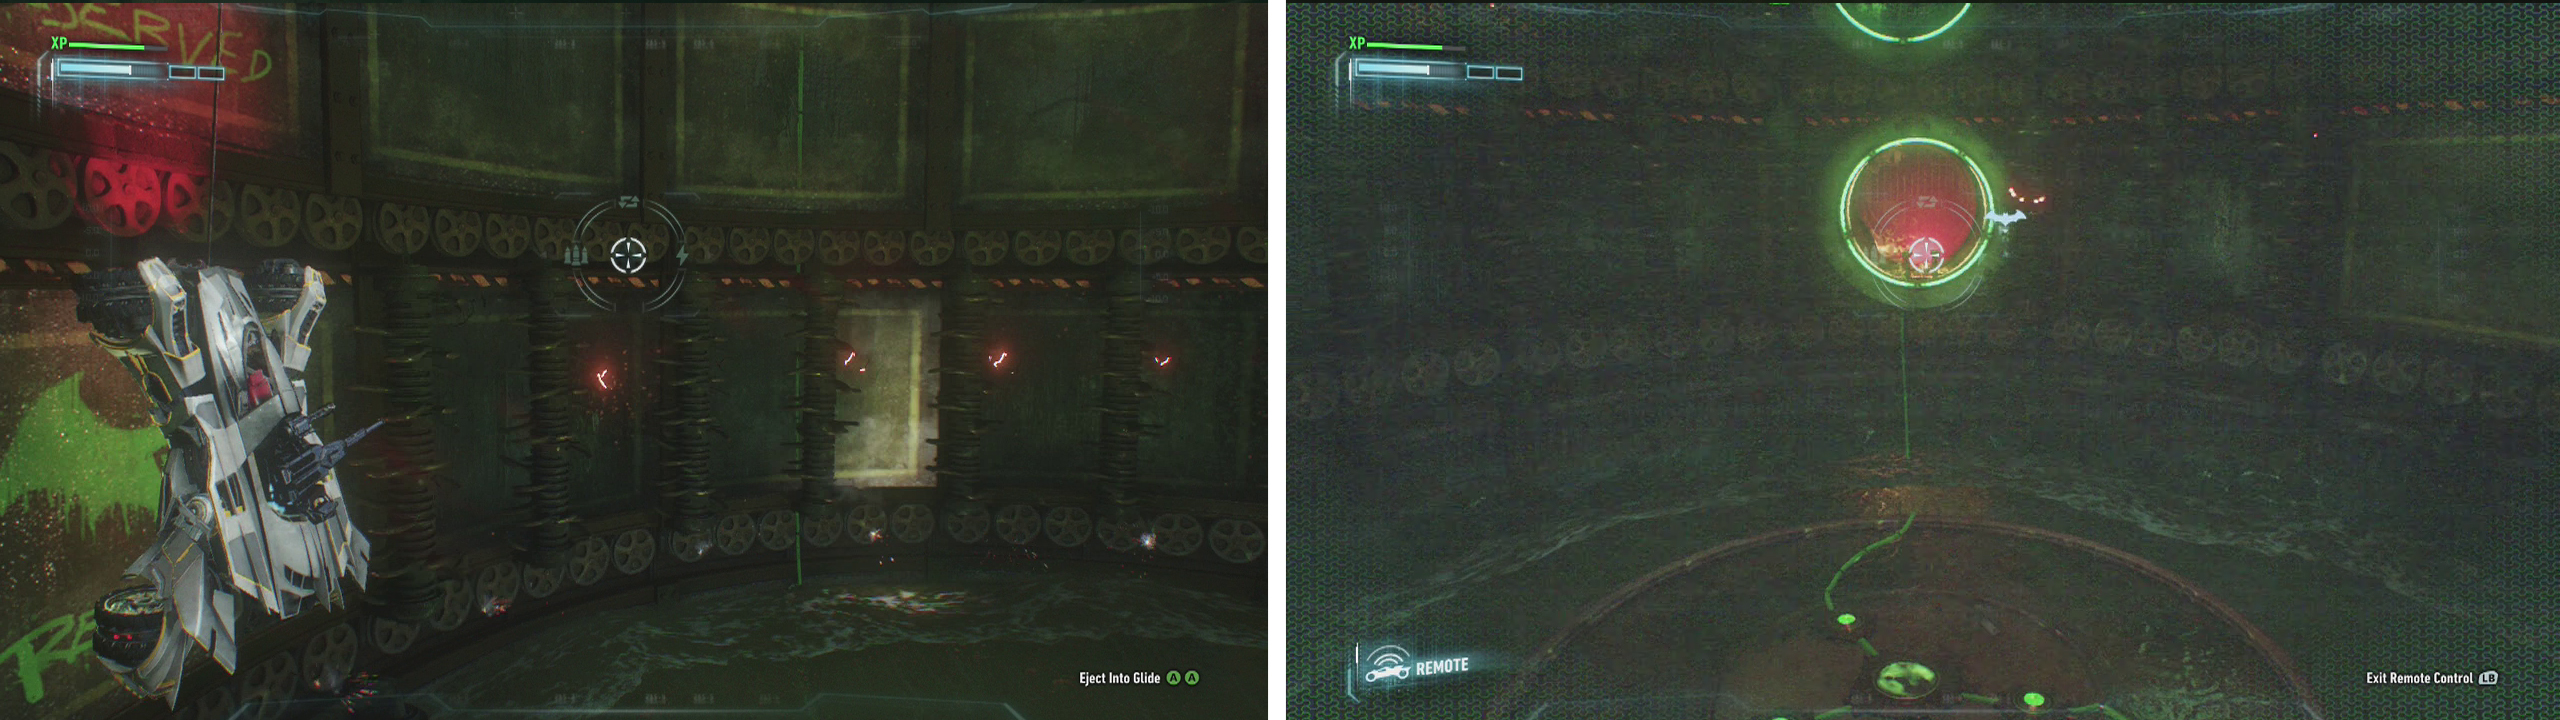 On the lowest level move onto the bat symbol again (left). After pulling the lever, shoot the Sentry Turret with the Batmobile (right)